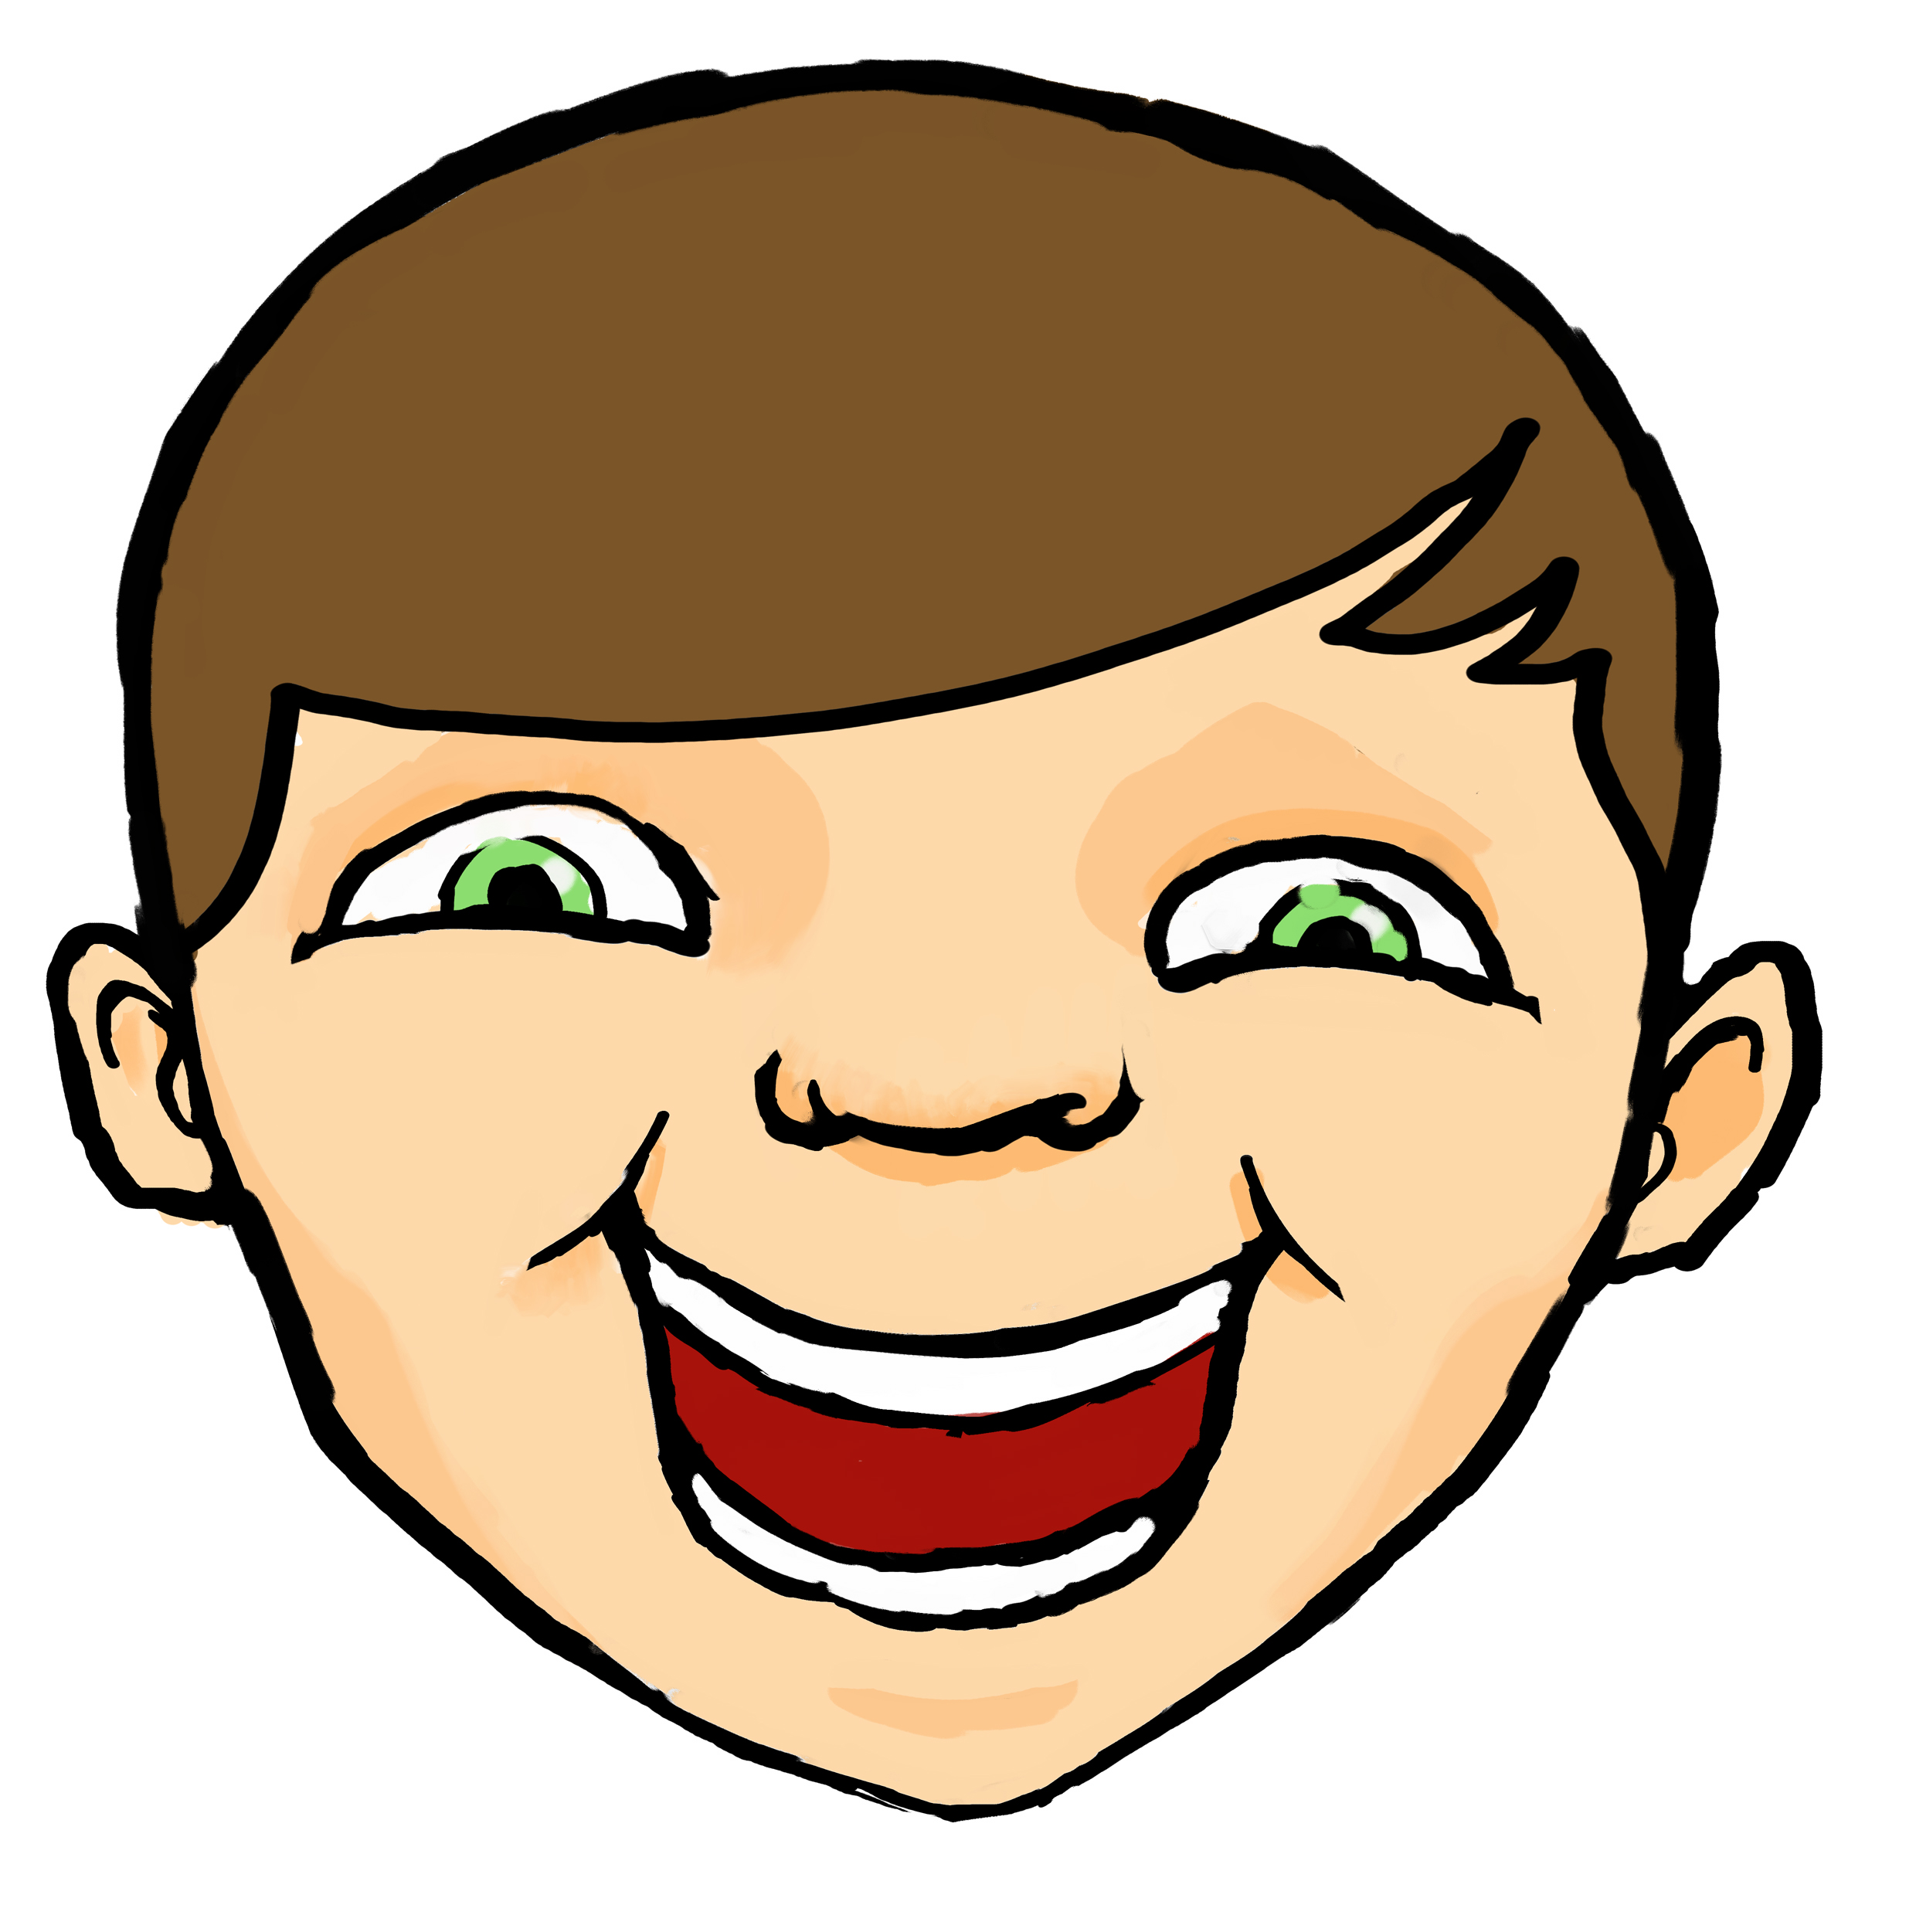 Hysterical Laughter - ClipArt Best